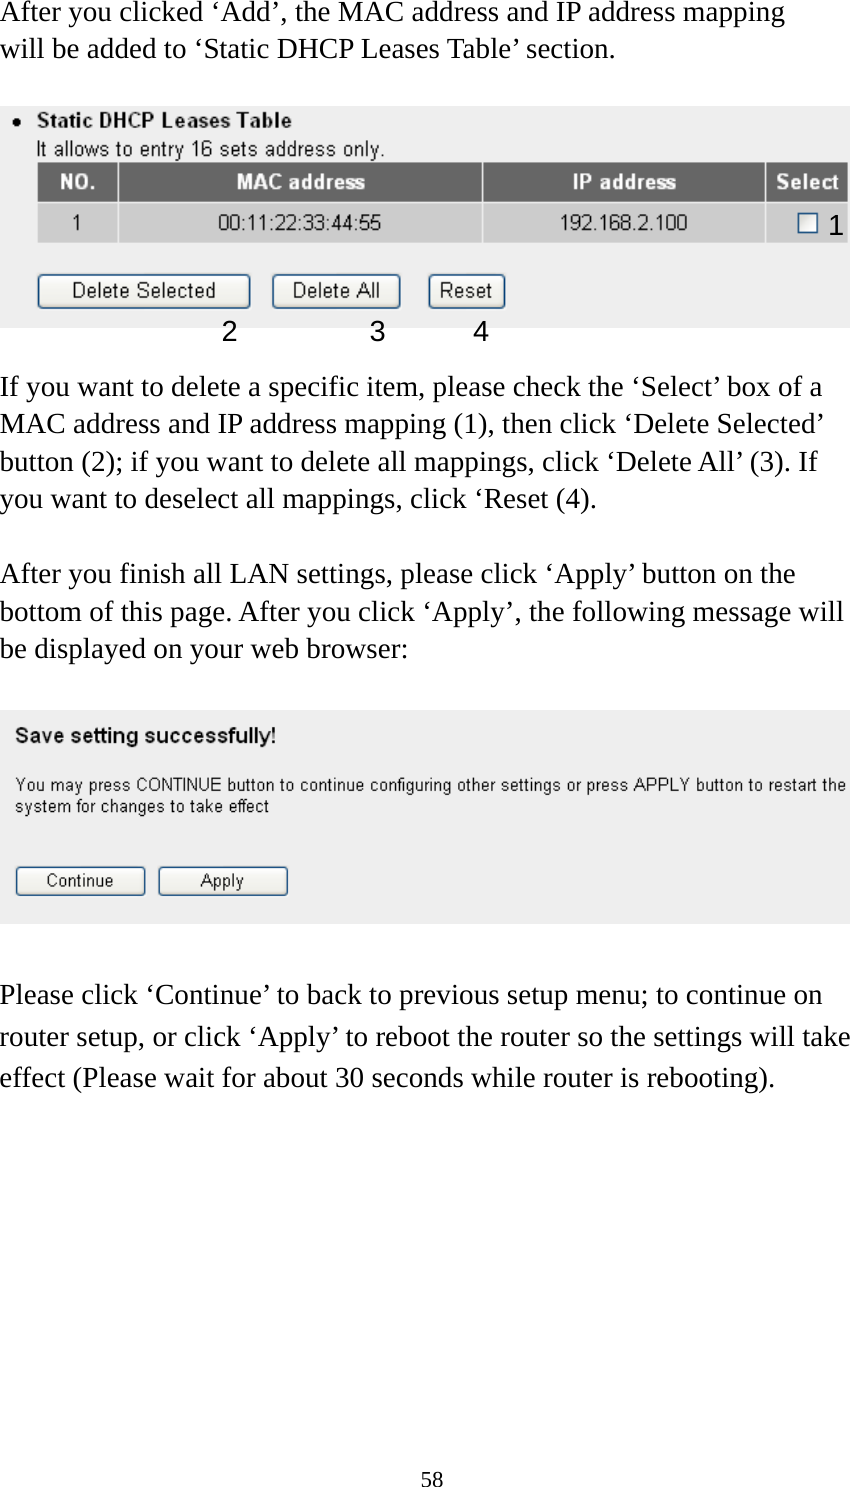 58 After you clicked ‘Add’, the MAC address and IP address mapping will be added to ‘Static DHCP Leases Table’ section.    If you want to delete a specific item, please check the ‘Select’ box of a MAC address and IP address mapping (1), then click ‘Delete Selected’ button (2); if you want to delete all mappings, click ‘Delete All’ (3). If you want to deselect all mappings, click ‘Reset (4).  After you finish all LAN settings, please click ‘Apply’ button on the bottom of this page. After you click ‘Apply’, the following message will be displayed on your web browser:    Please click ‘Continue’ to back to previous setup menu; to continue on router setup, or click ‘Apply’ to reboot the router so the settings will take effect (Please wait for about 30 seconds while router is rebooting). 1 2 3 4 